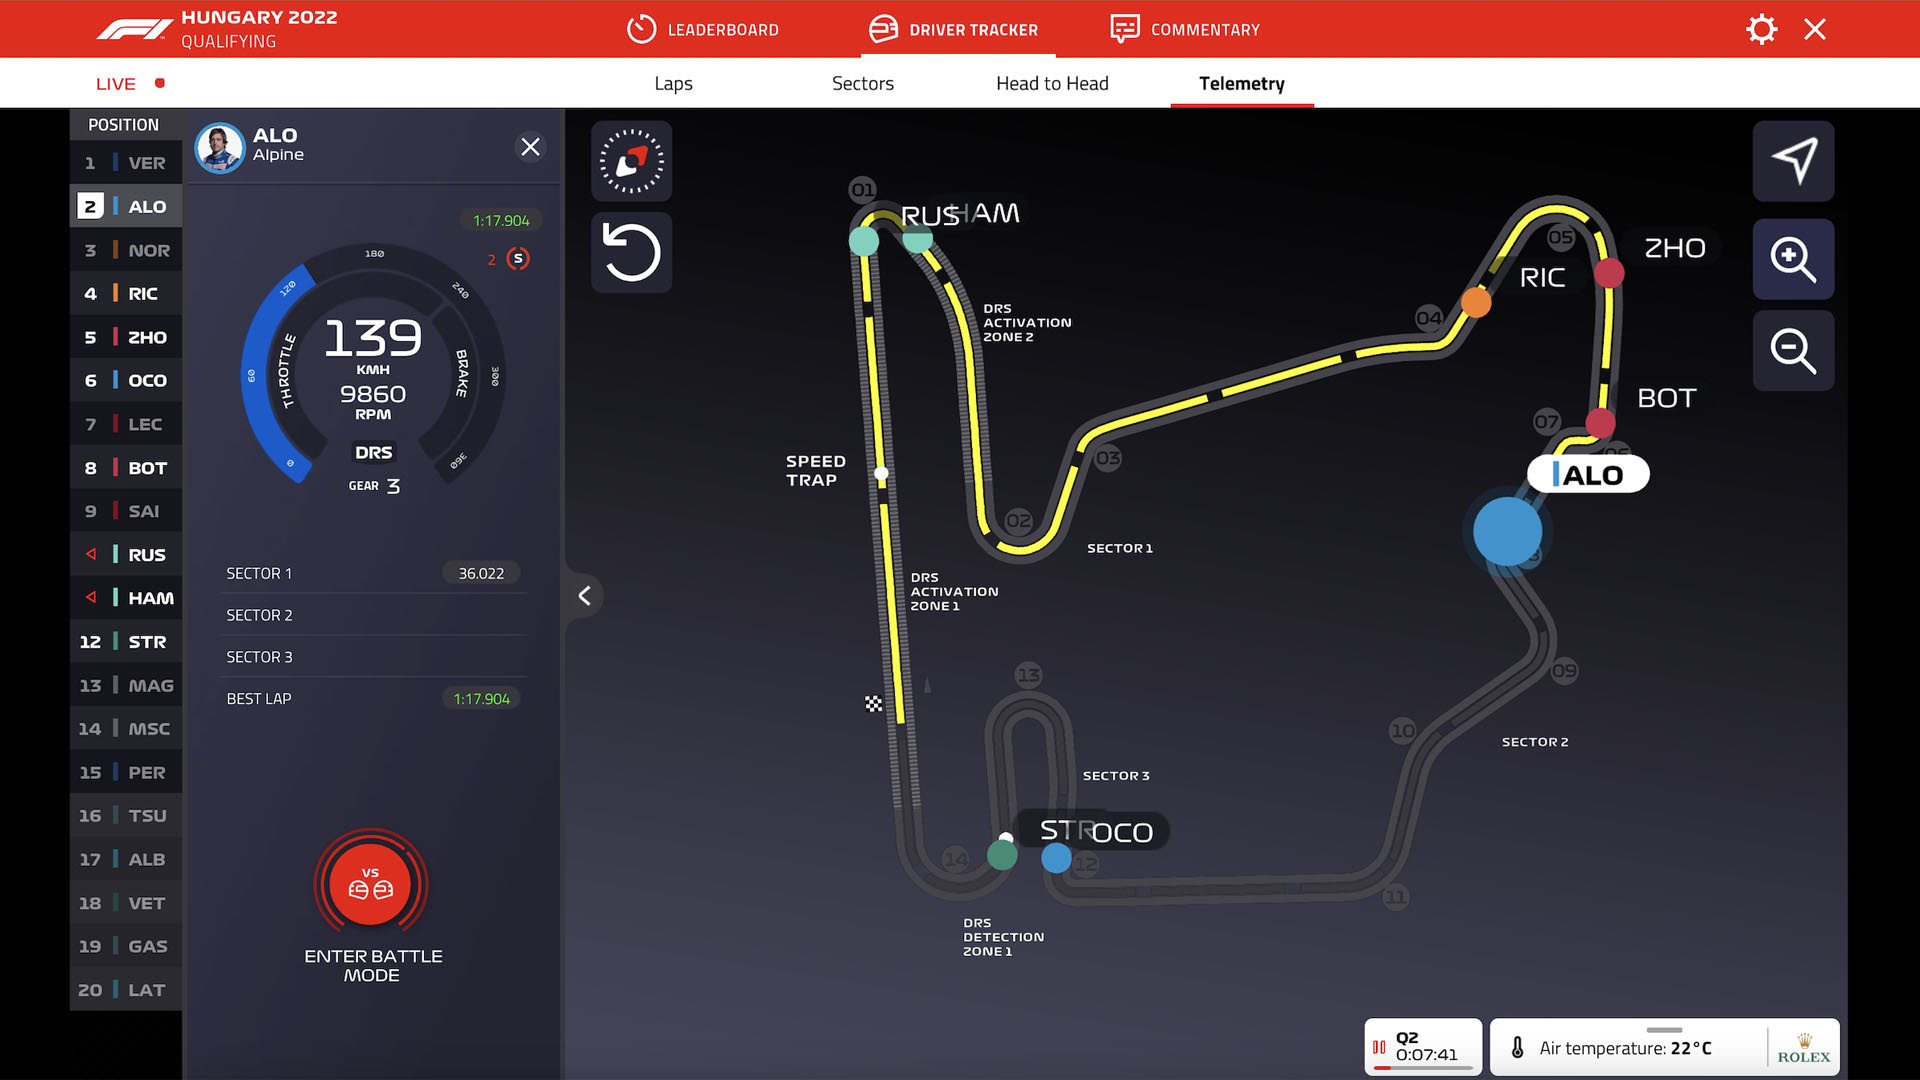 Improved Live Timing on F1 for the 2022 season Formula 1®